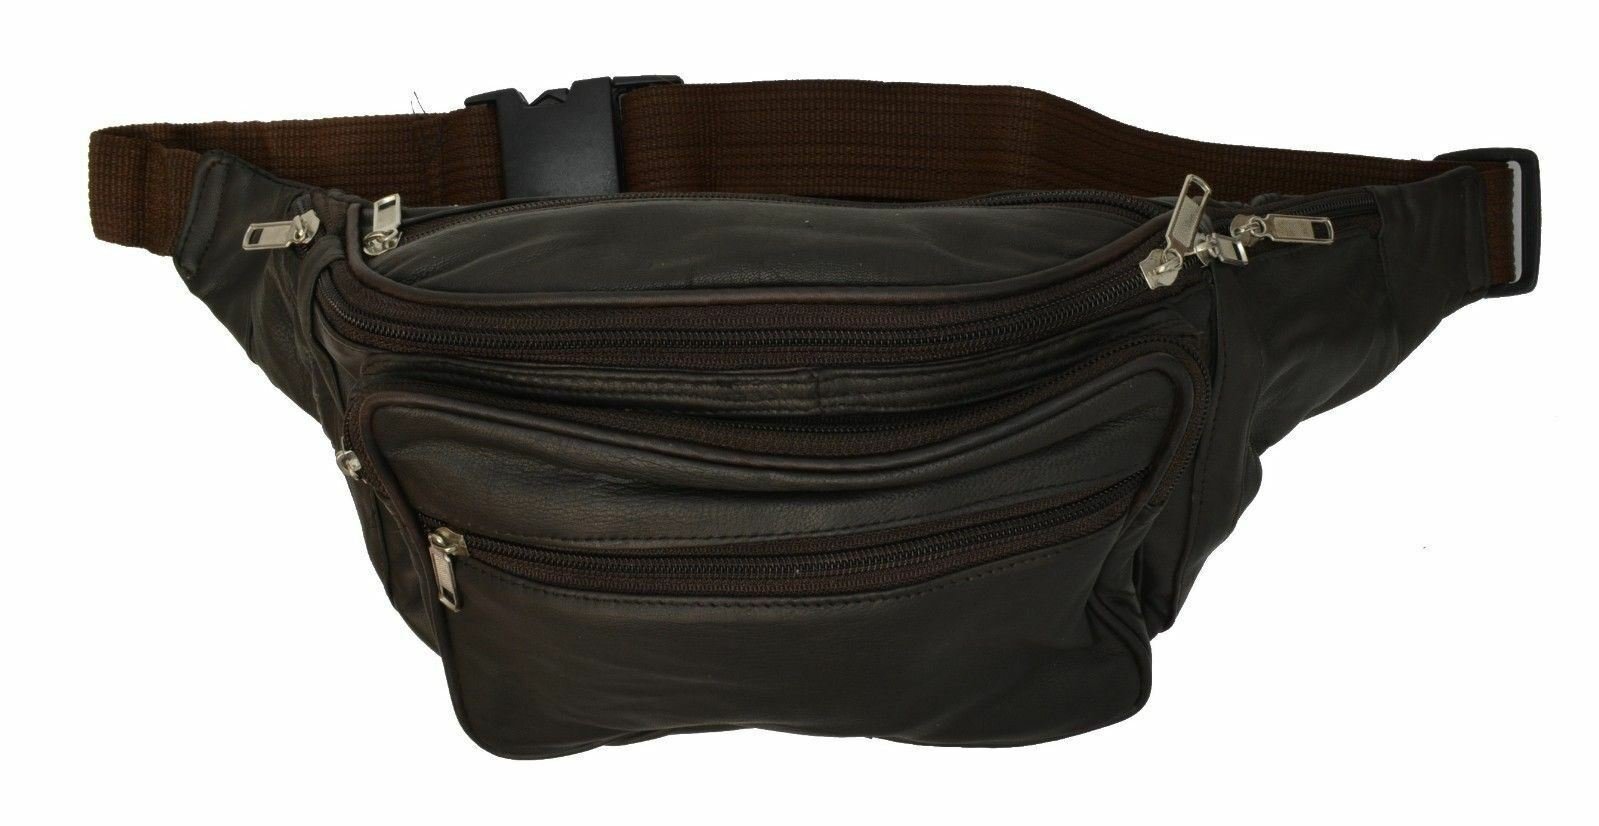 New Brown Design Large Multi Zippered Genuine Leather Fanny Pack Waist Bag